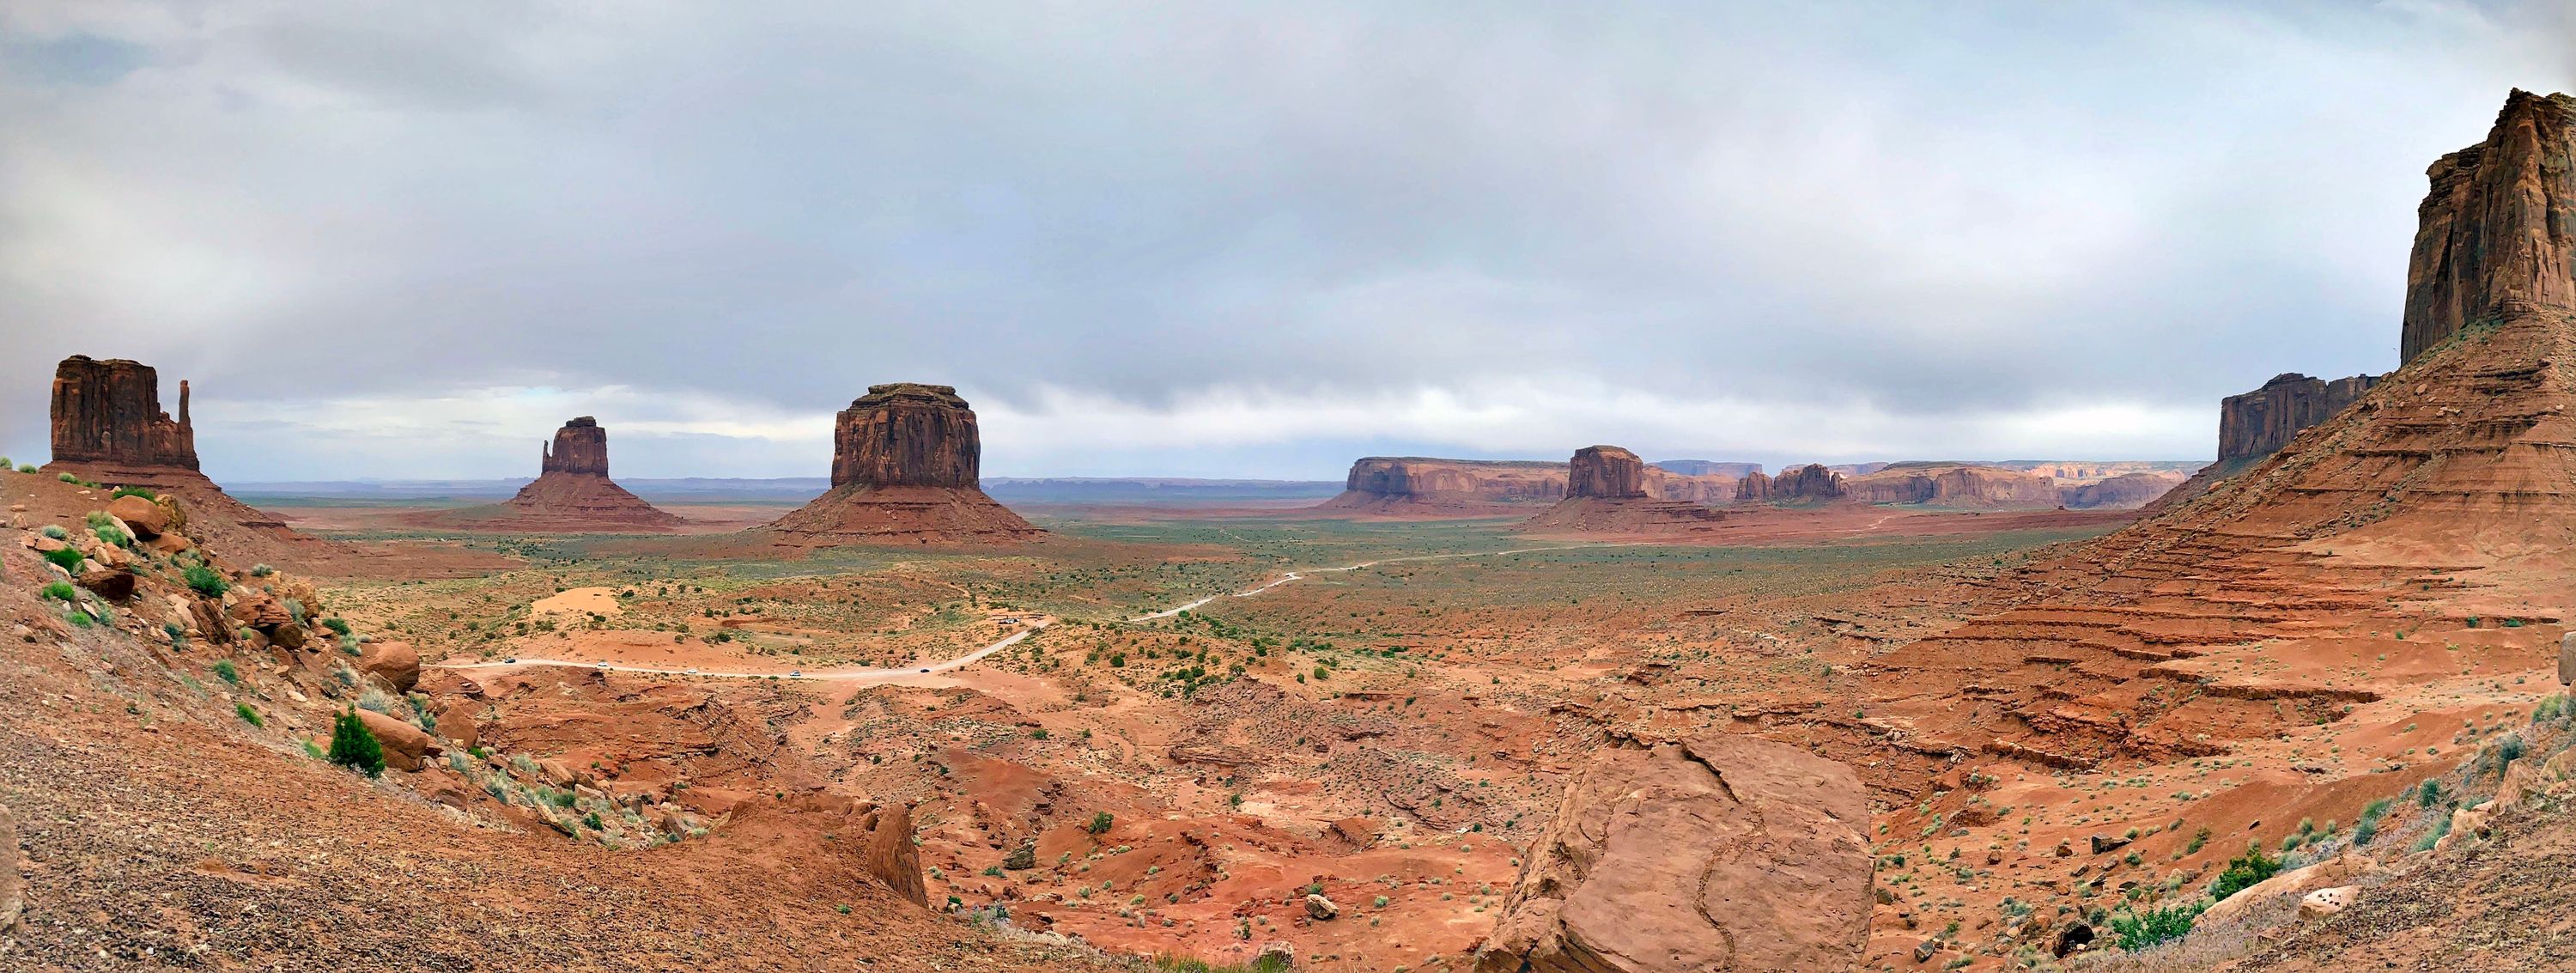 Panoramic view of Monument Valley from a balcony at The View Hotel at Monument Valley